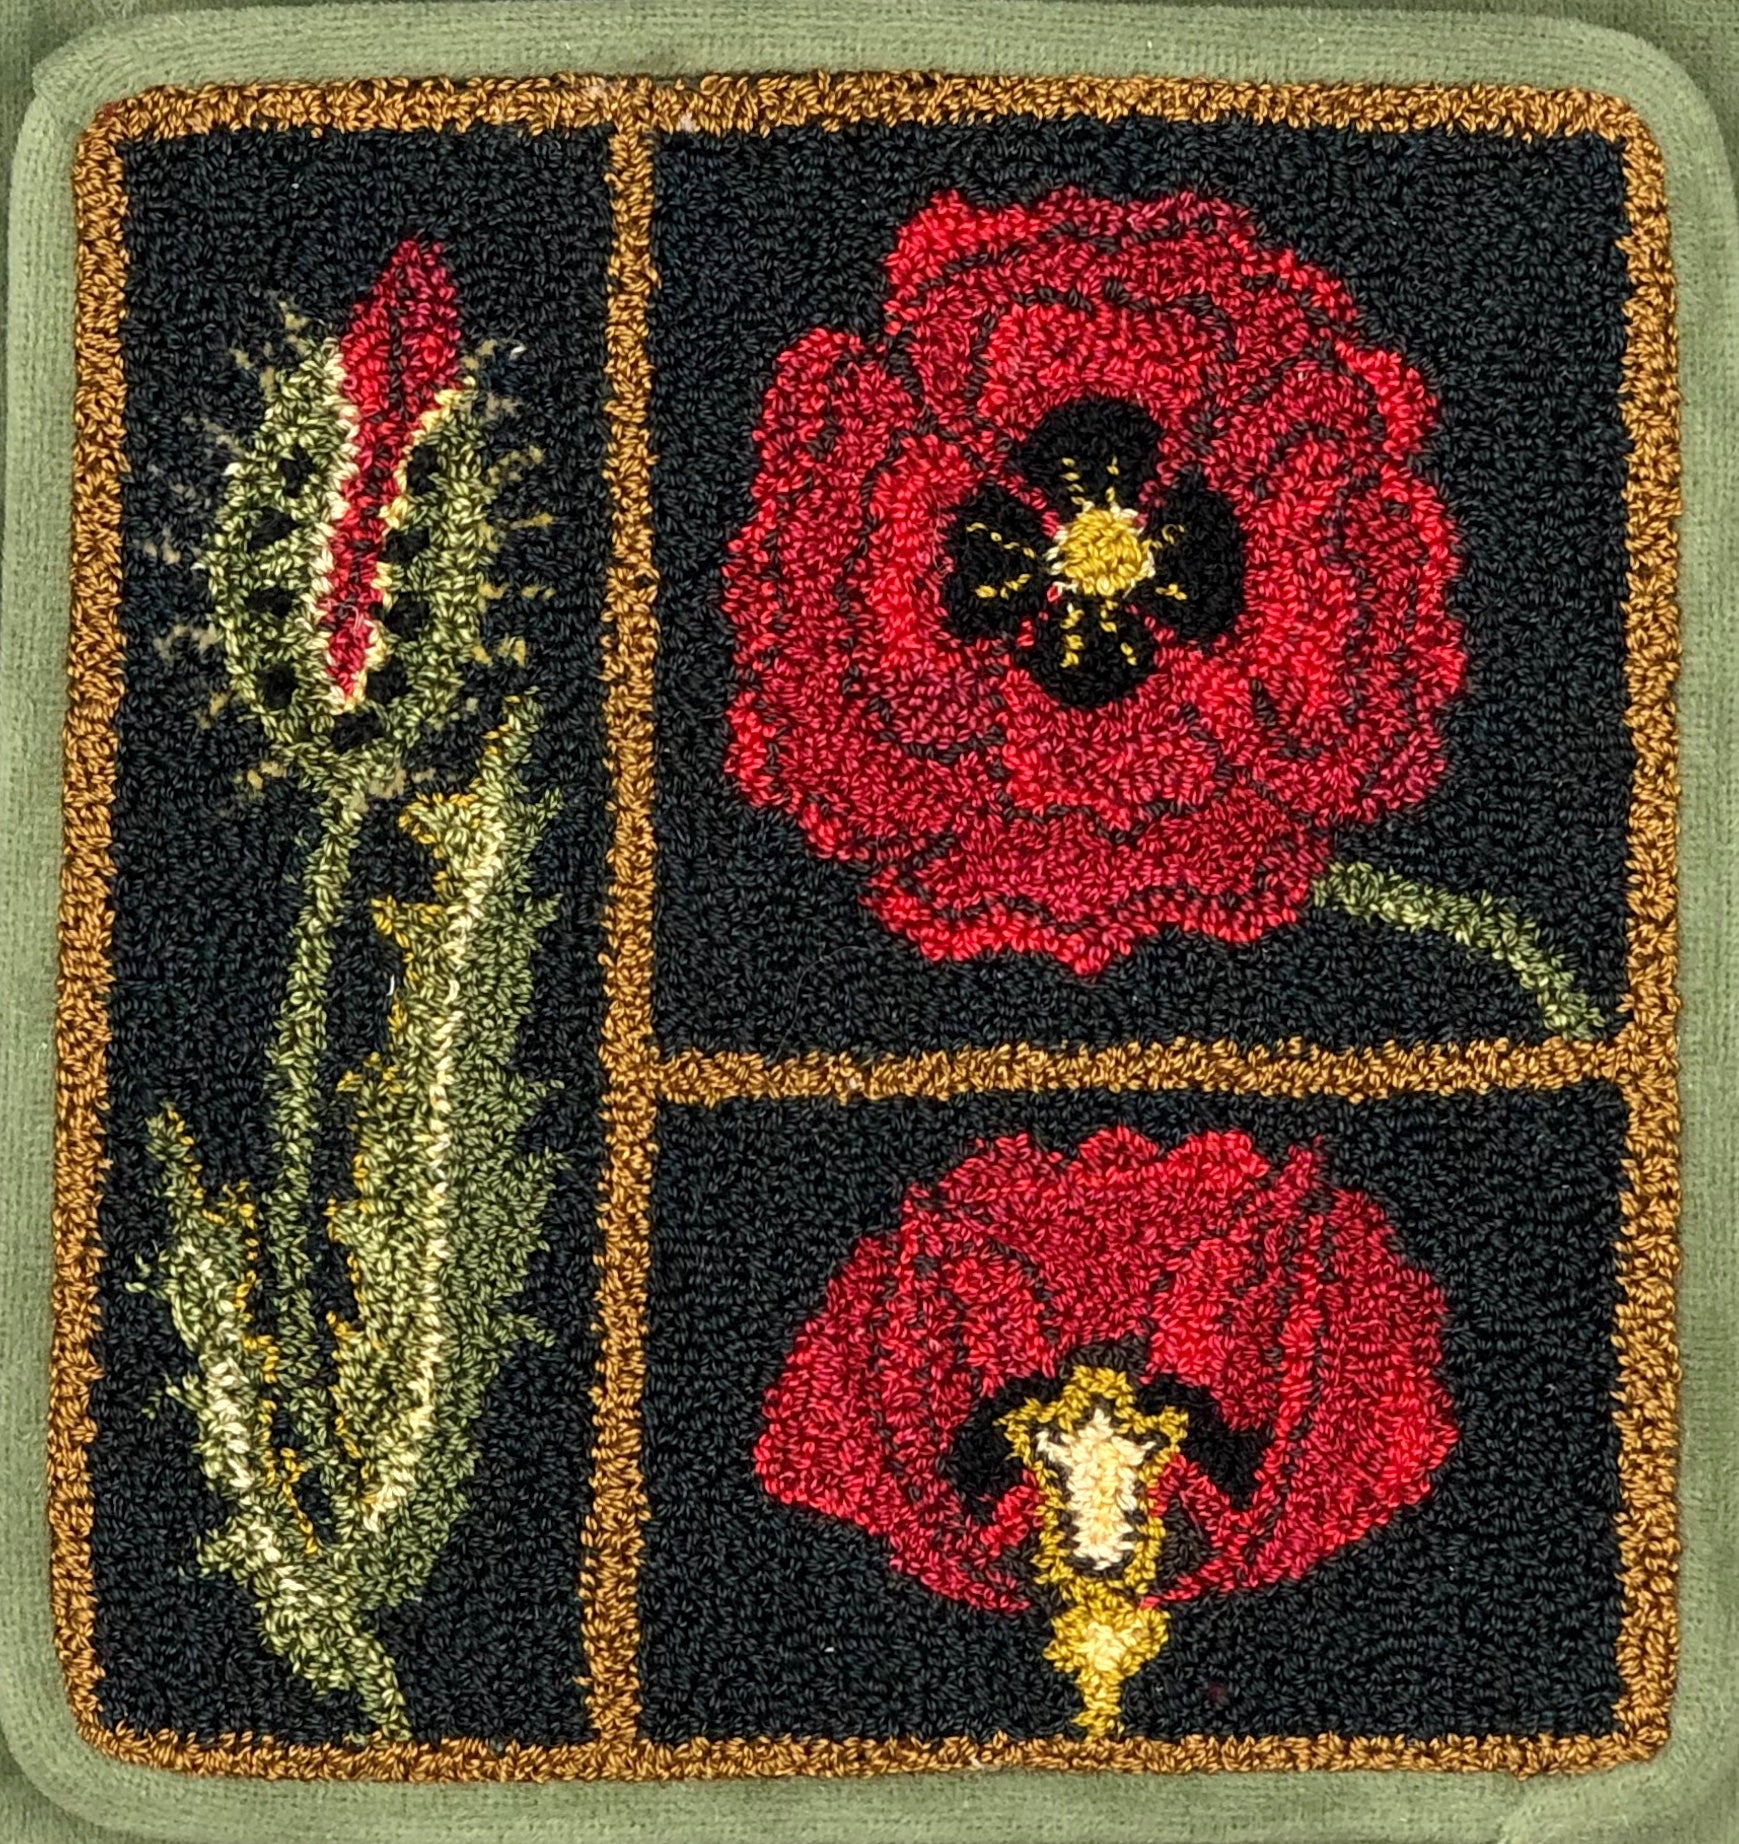 Poppy- Rug Hooking or Rug Punch Needle Pattern on Natural Linen, by Orphaned Wool. This botanical pattern also has a companion design (Marigold- Sold Separately) Both designs makes a lovely set of pillows.